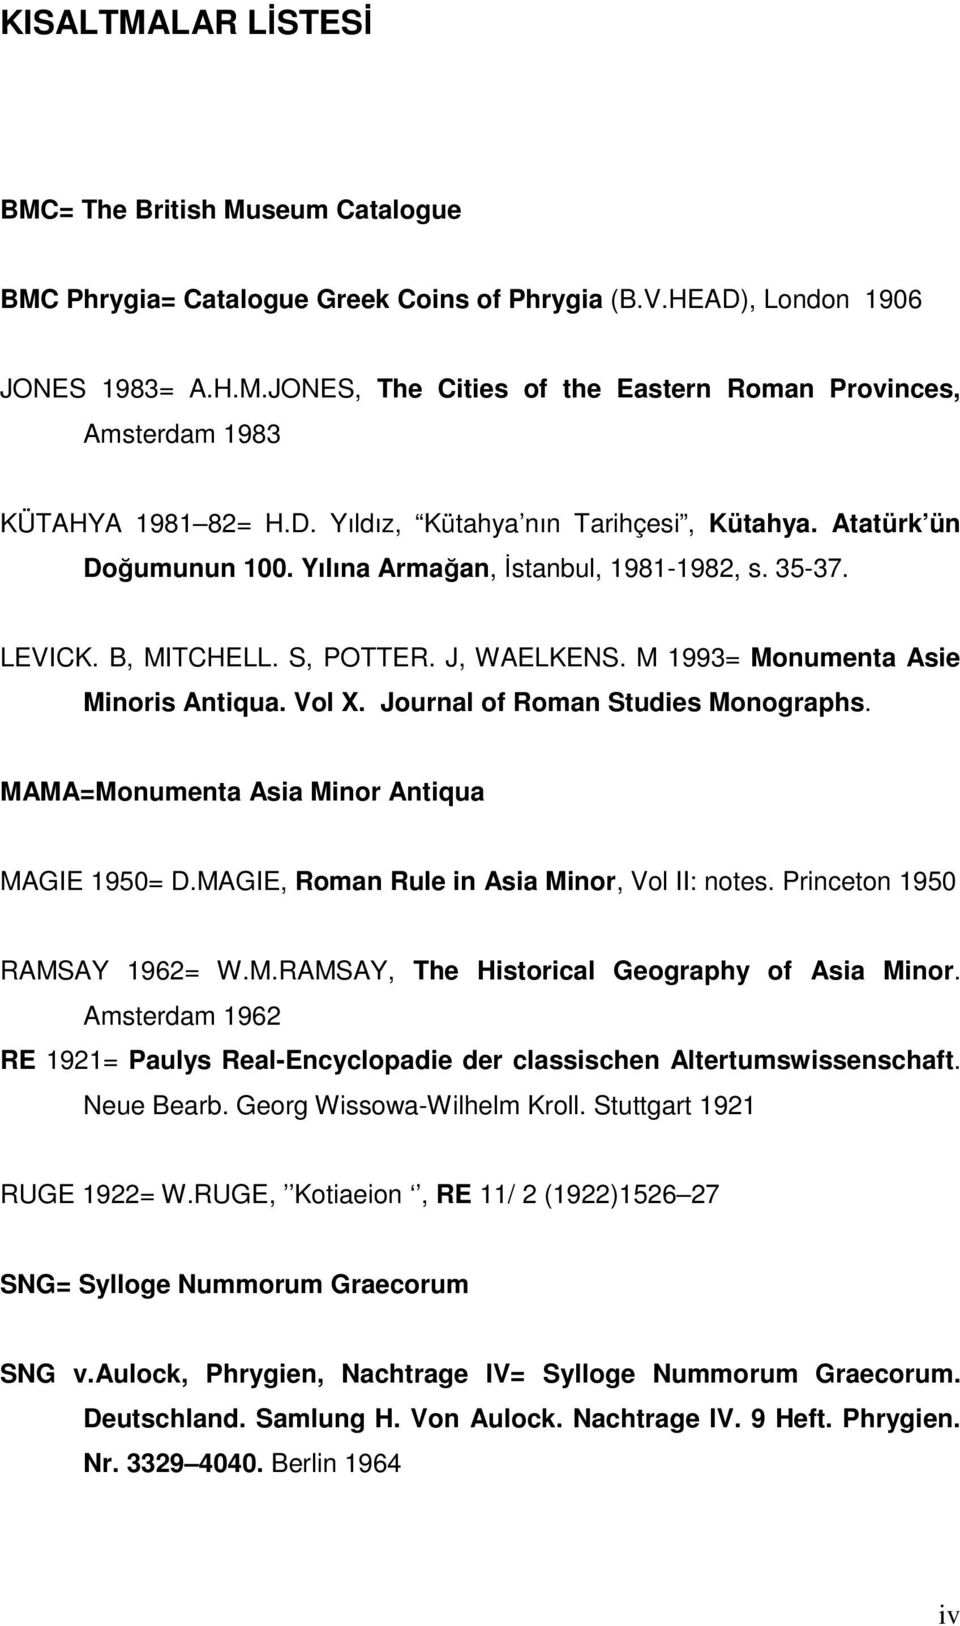 Vol X. Journal of Roman Studies Monographs. MAMA=Monumenta Asia Minor Antiqua MAGIE 1950= D.MAGIE, Roman Rule in Asia Minor, Vol II: notes. Princeton 1950 RAMSAY 1962= W.M.RAMSAY, The Historical Geography of Asia Minor.